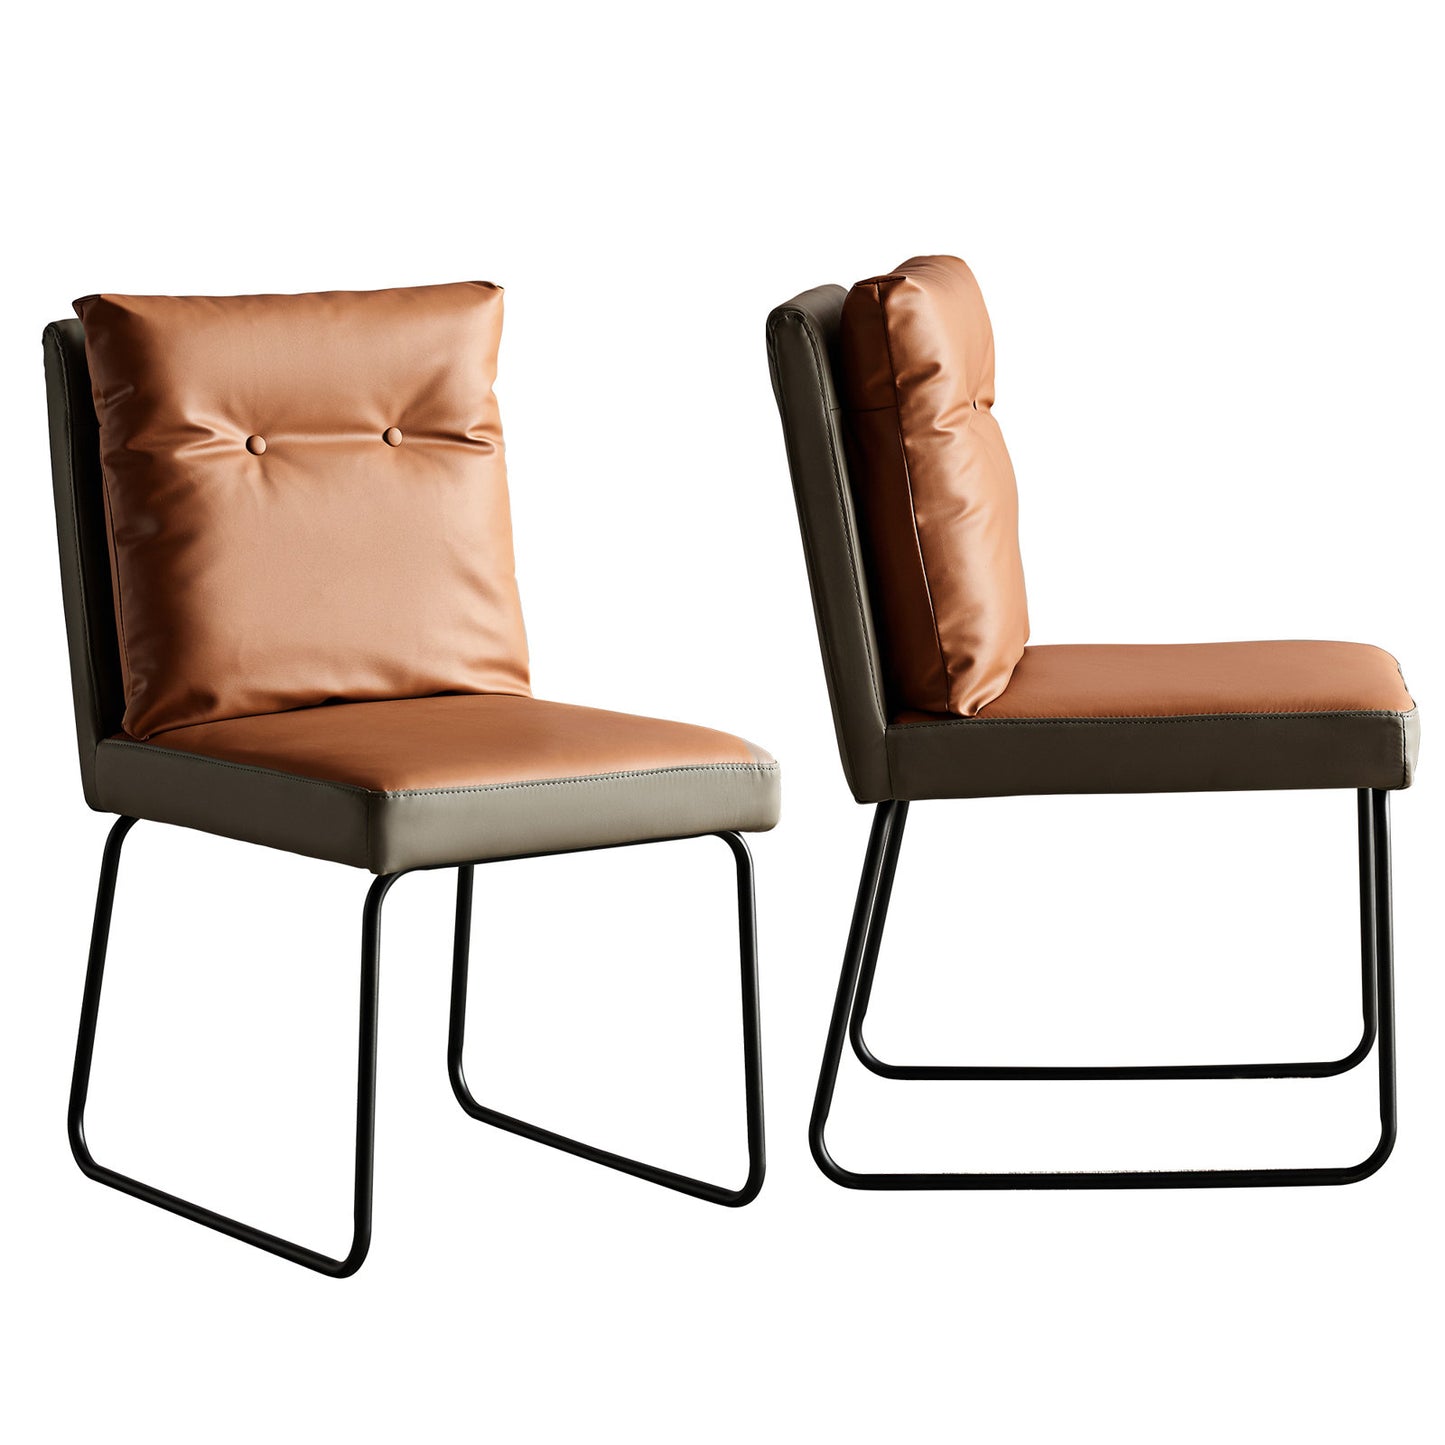 Mid-Century Modern Orange Upholstered Dining Chairs PU Leather Set of 2